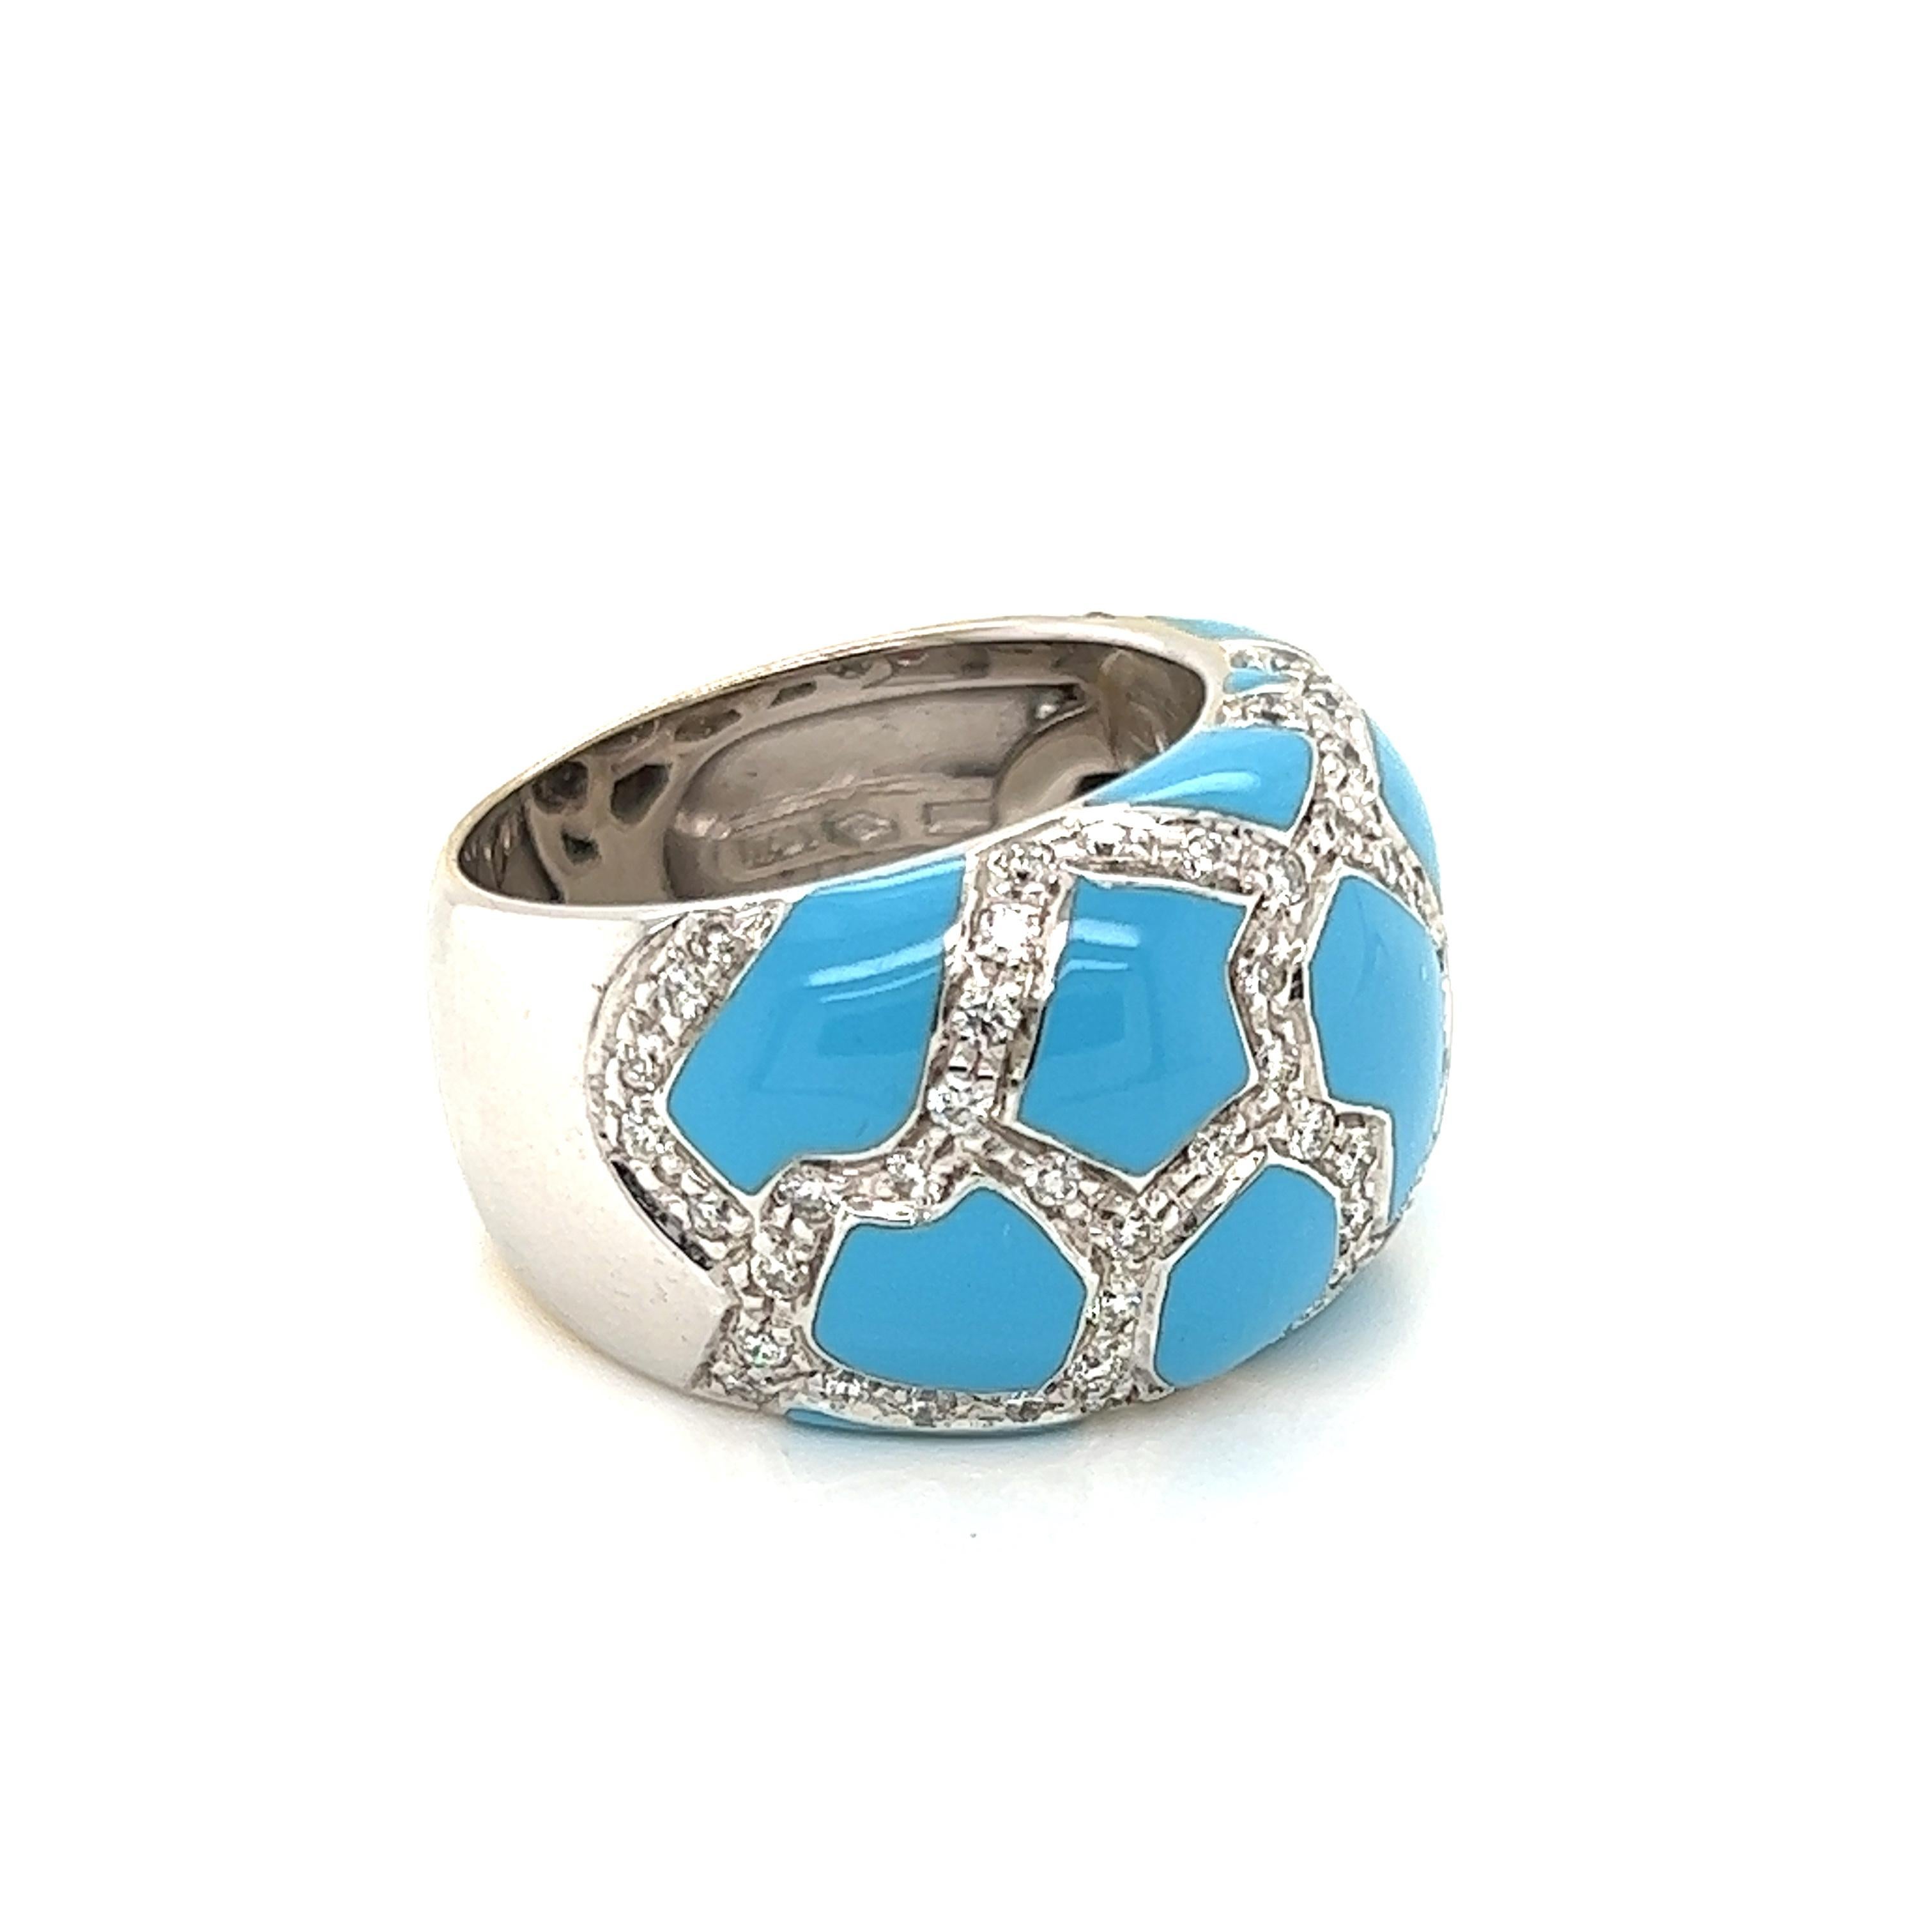 Brilliant Cut Roberto Coin Diamond Turquoise Mosaic 18k Wide Gold Wide Dome Band Ring For Sale